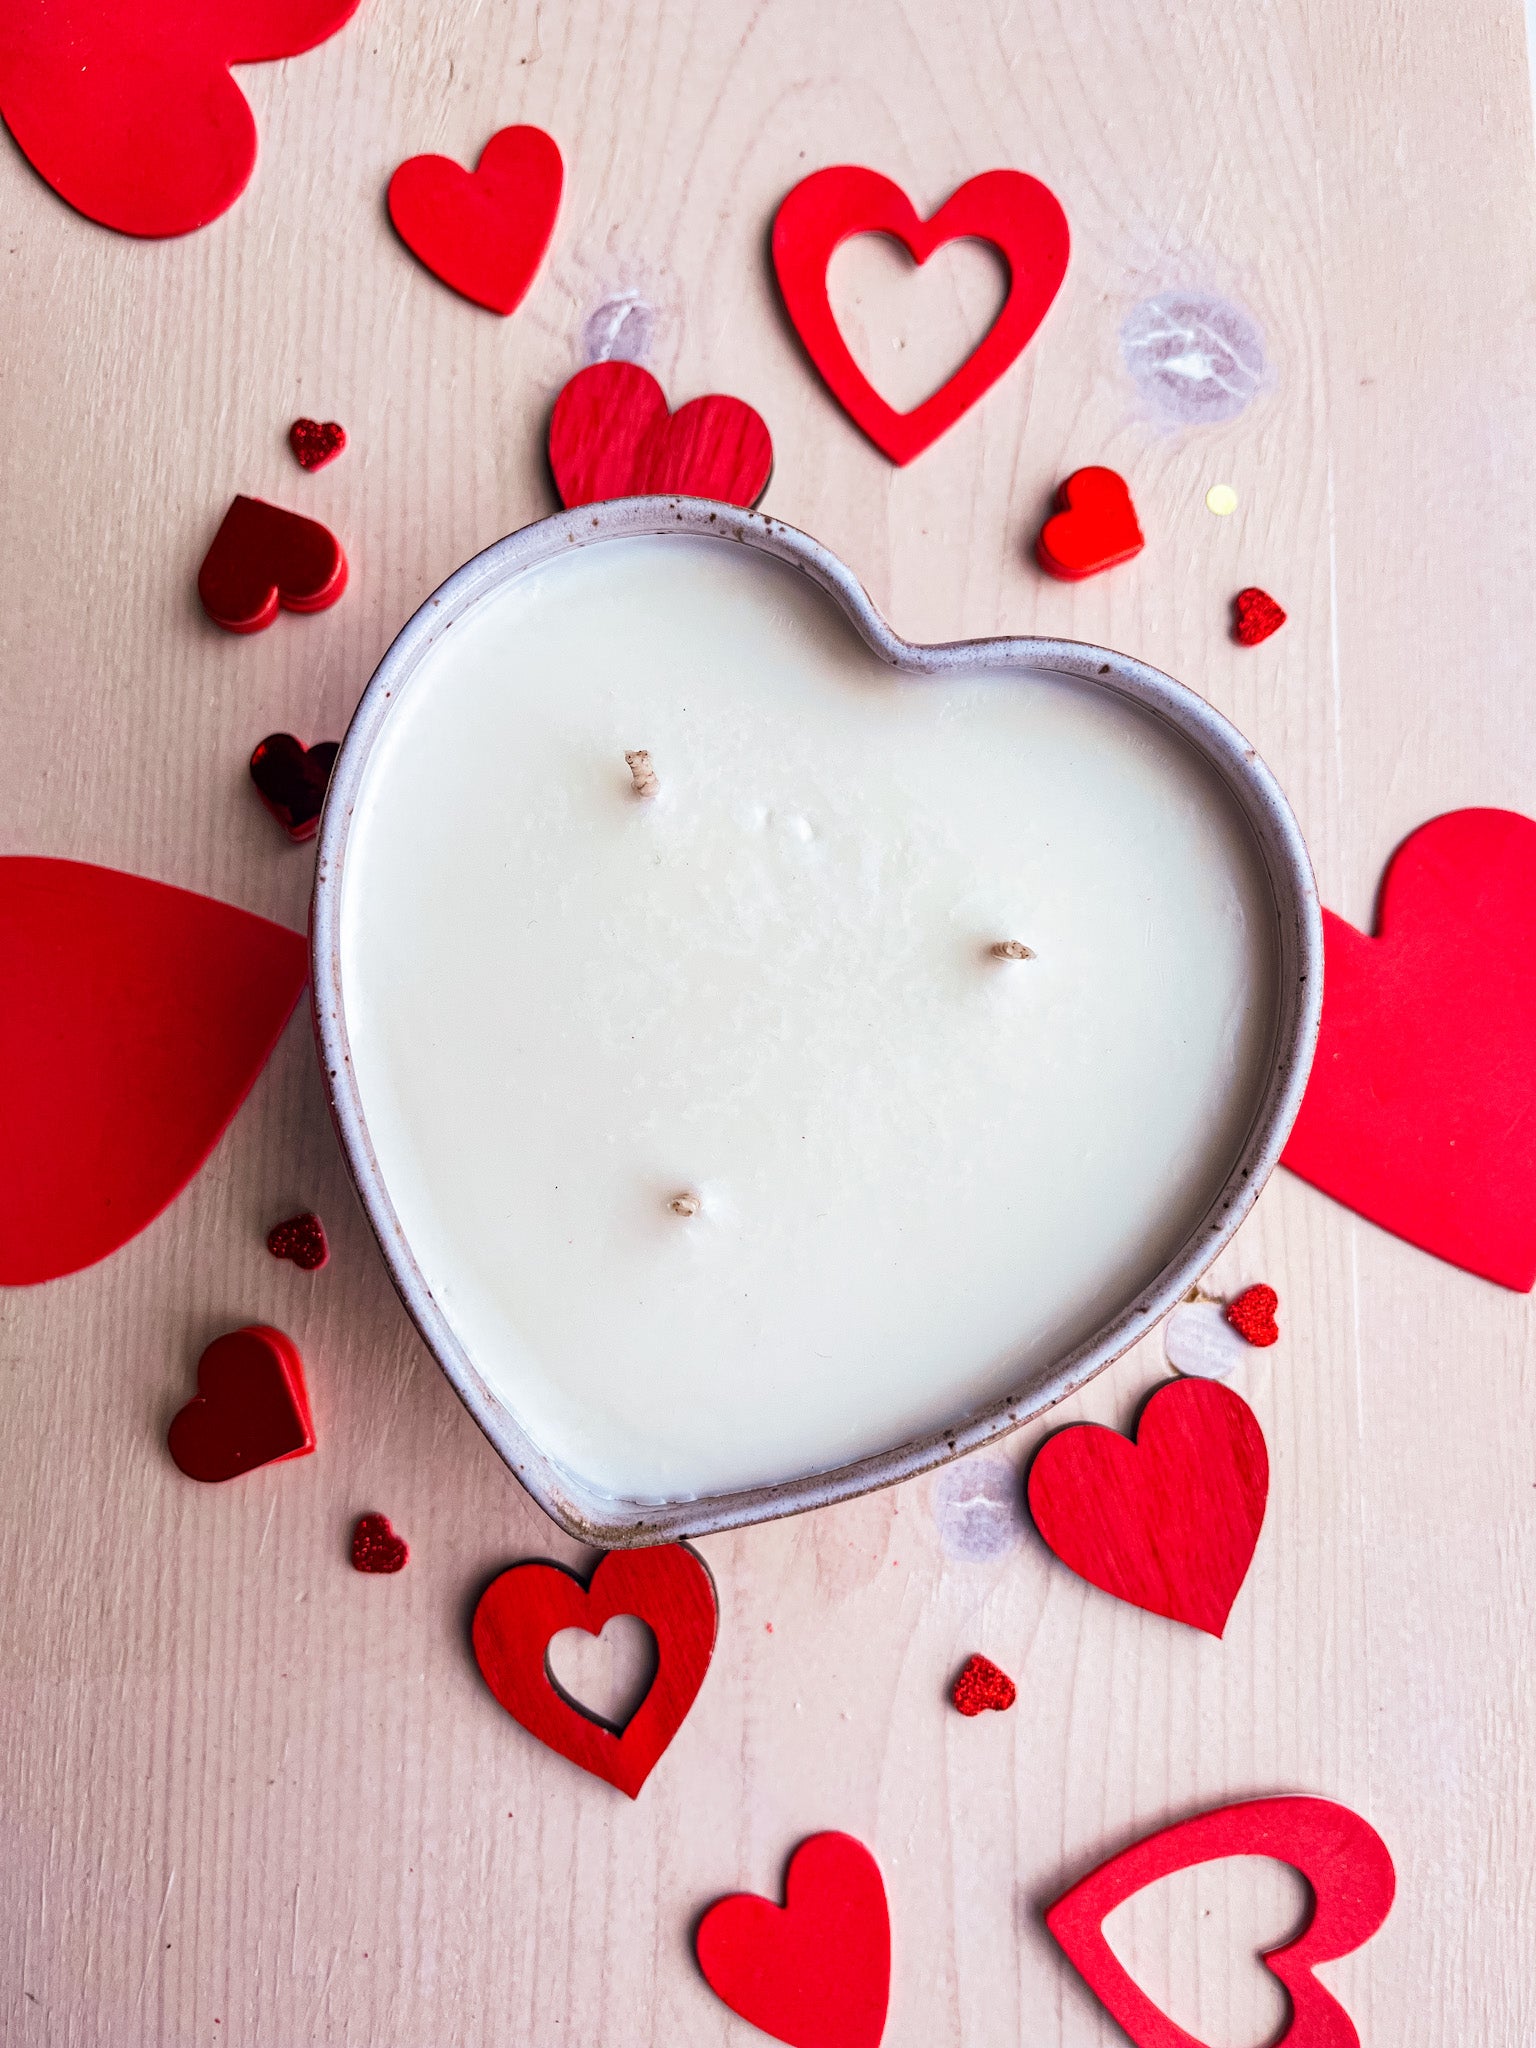 Heart Bowl Candle